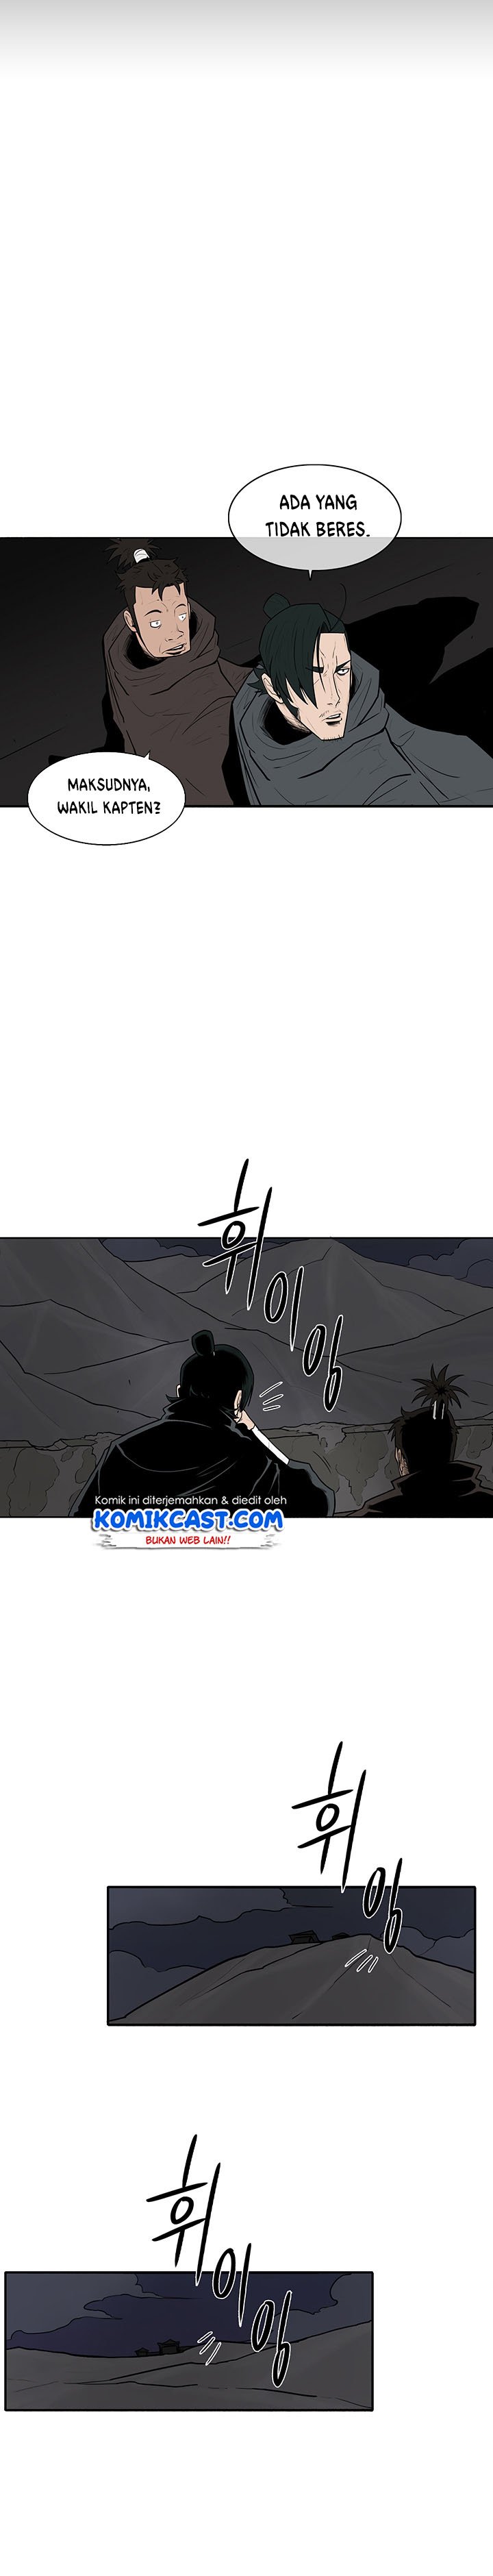 Legend of the Northern Blade Chapter 9